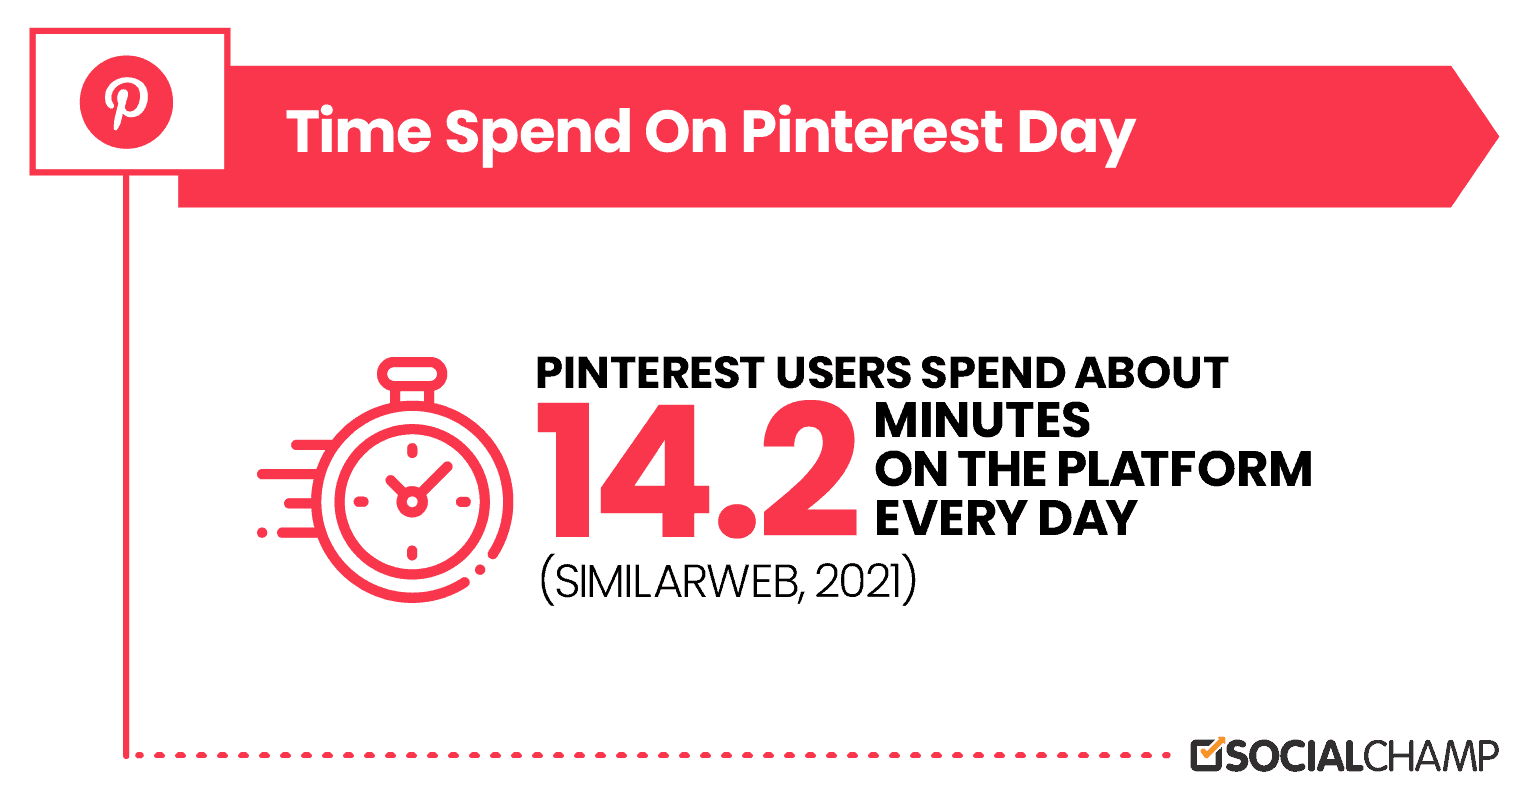 People Spend 14.2 Minutes on Pinterest Every Day